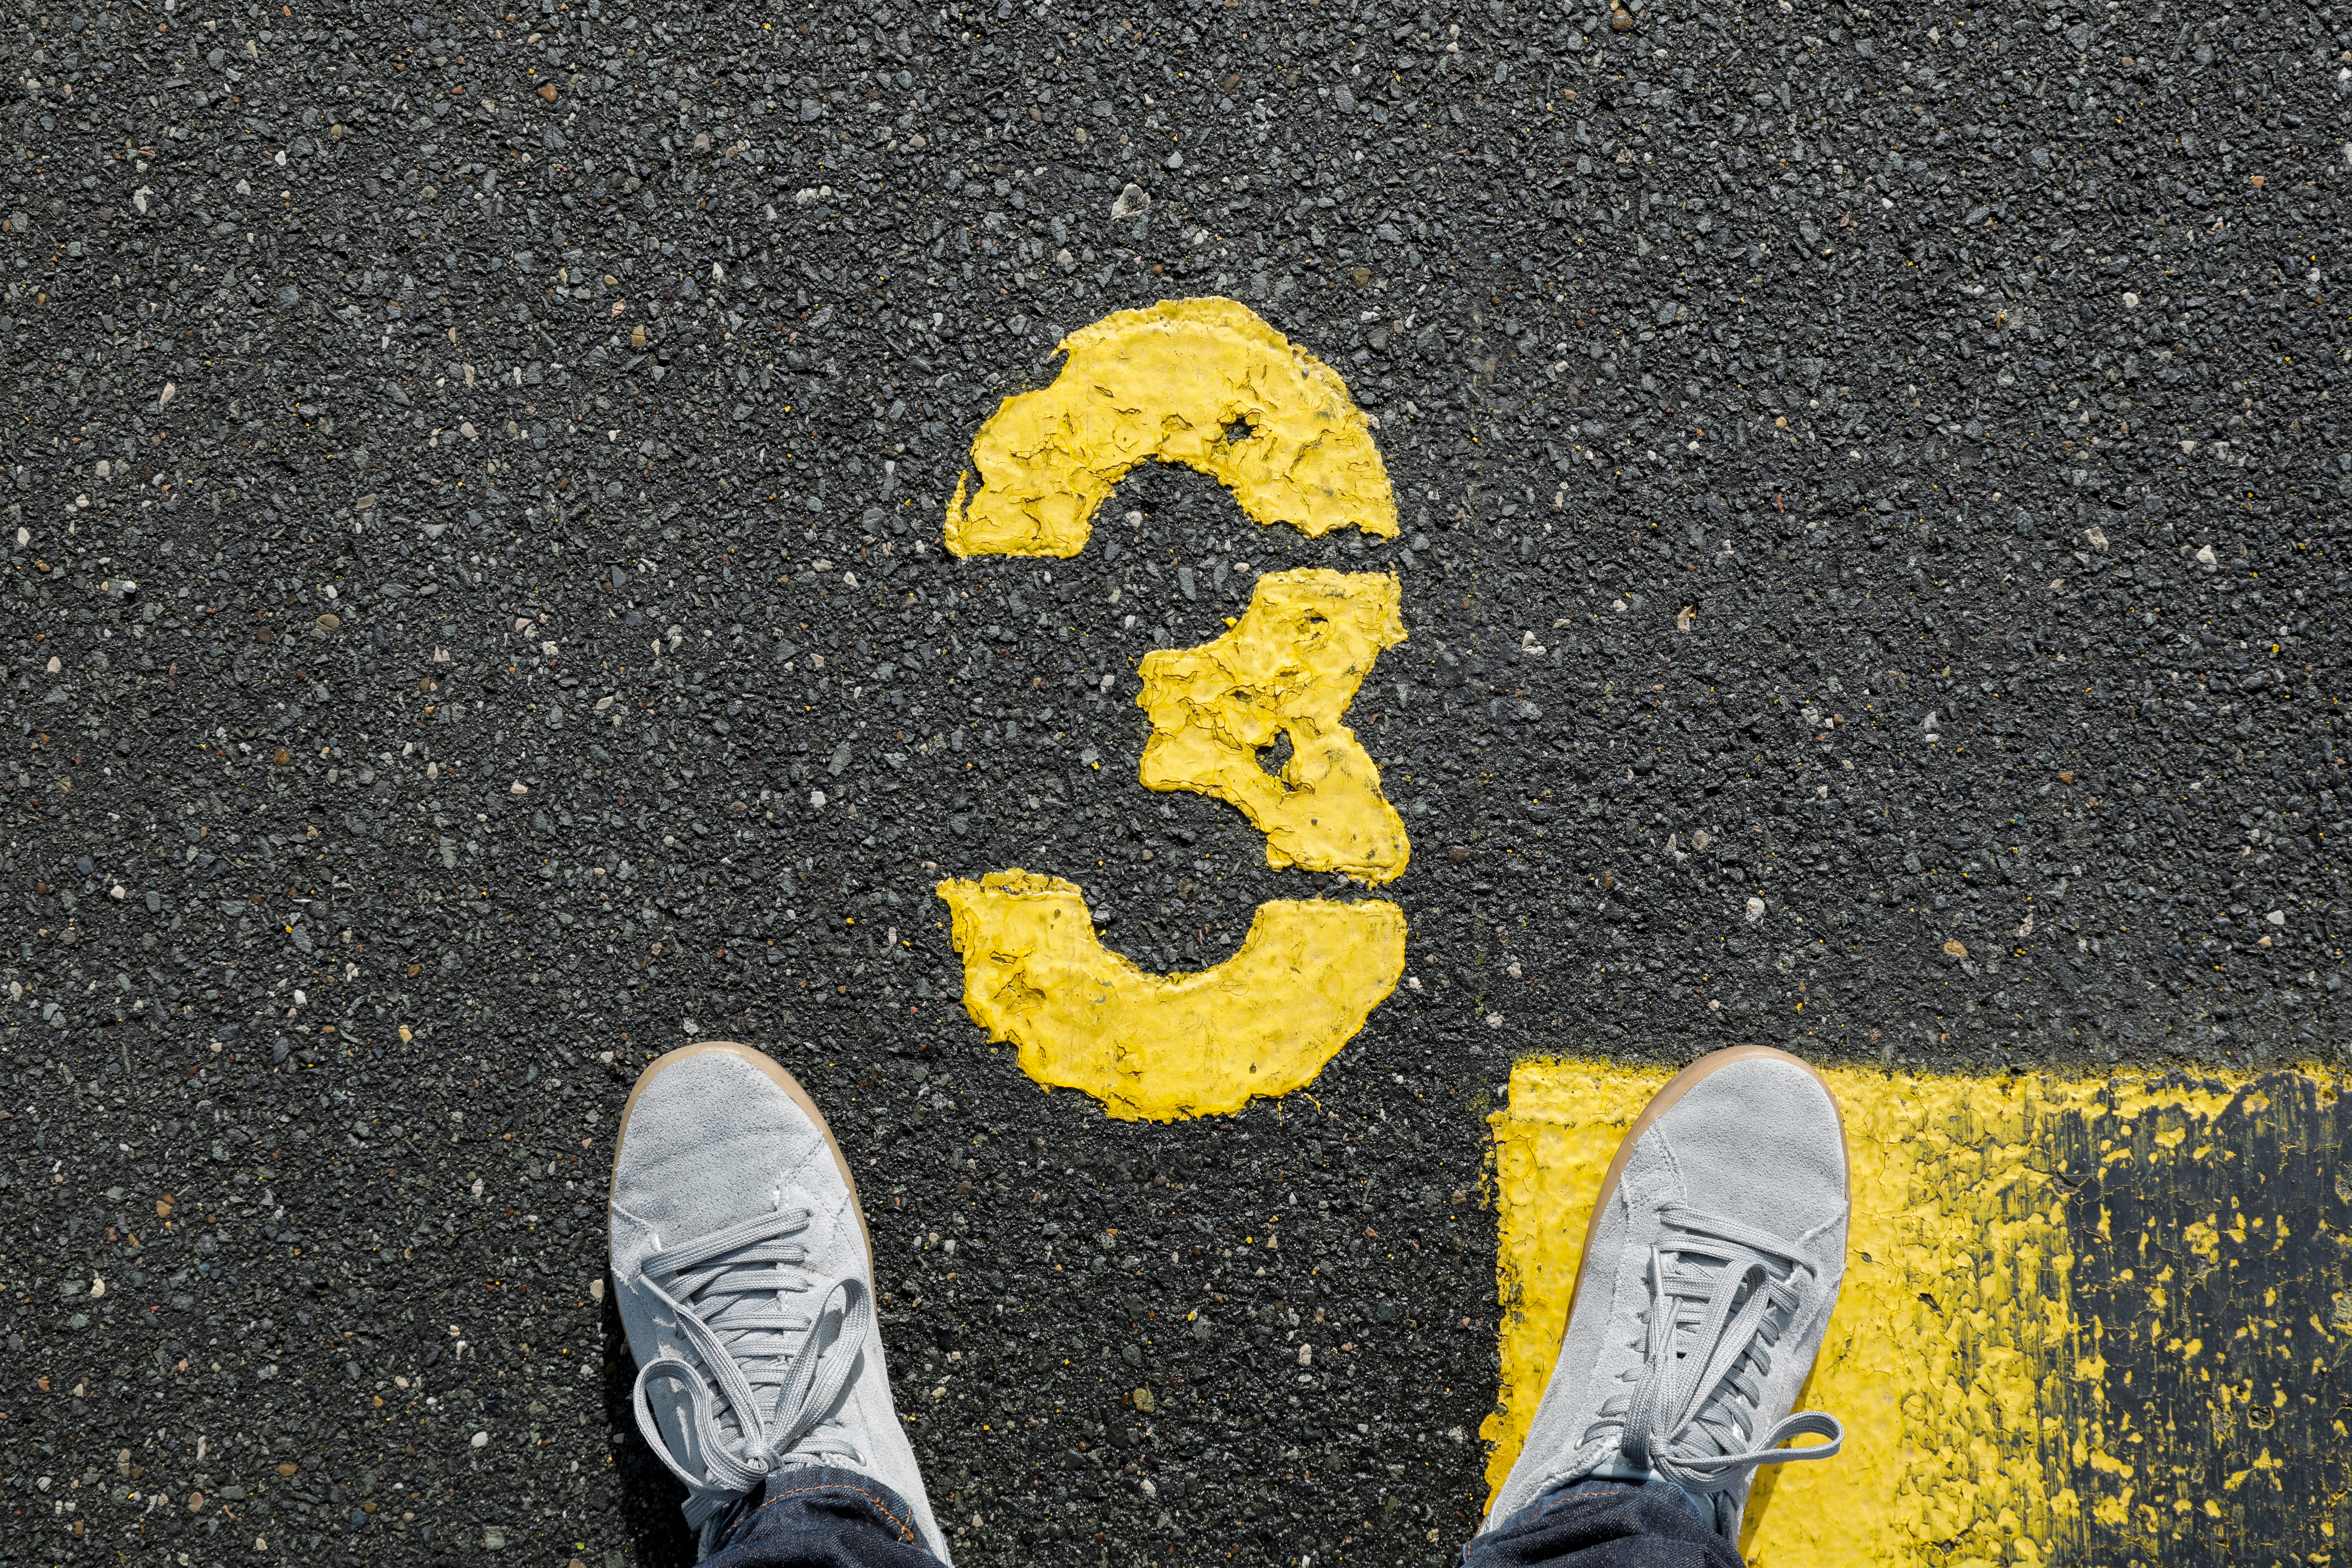 Image shows a yellow number 3 painted on an asphalt road, with a person's feet in sneakers pointed toward it.